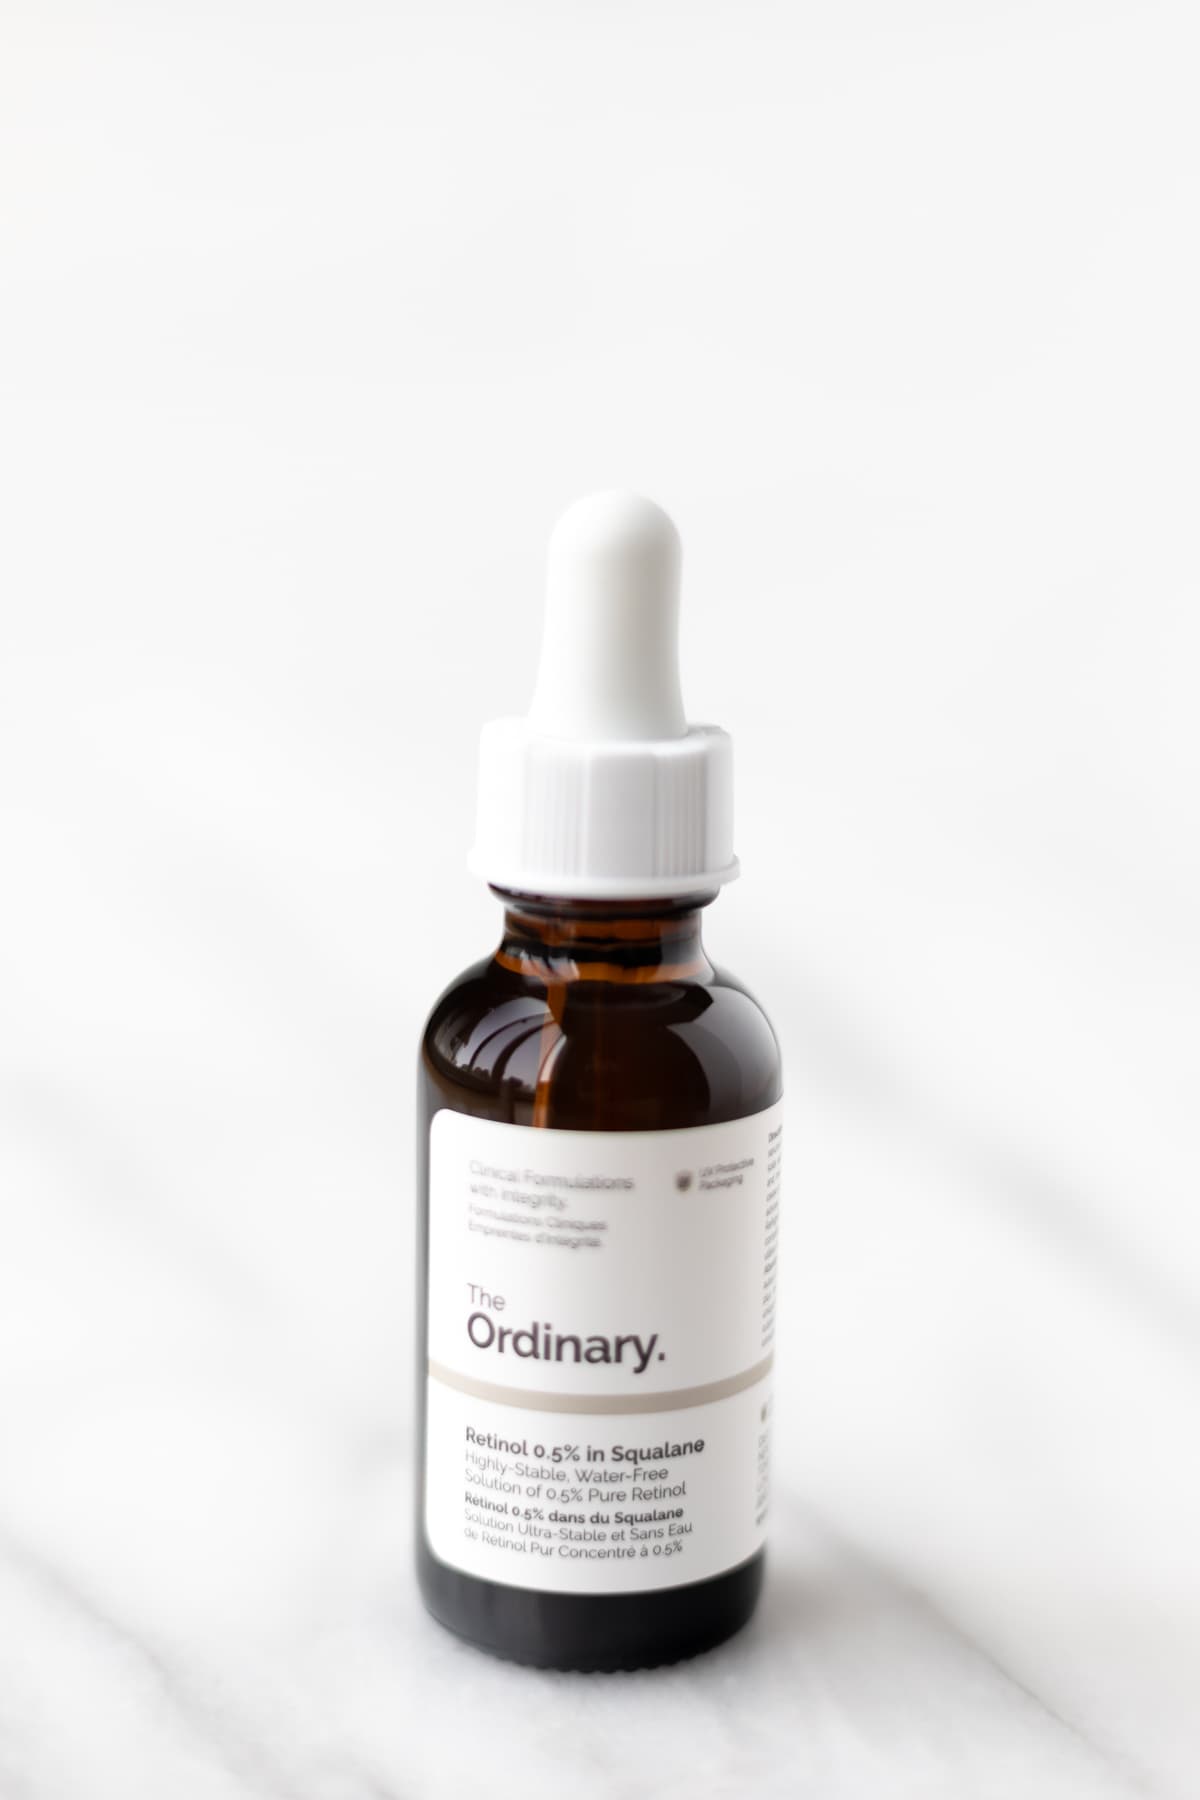 The Ordinary Retinol 0.5% bottle on a marble table.